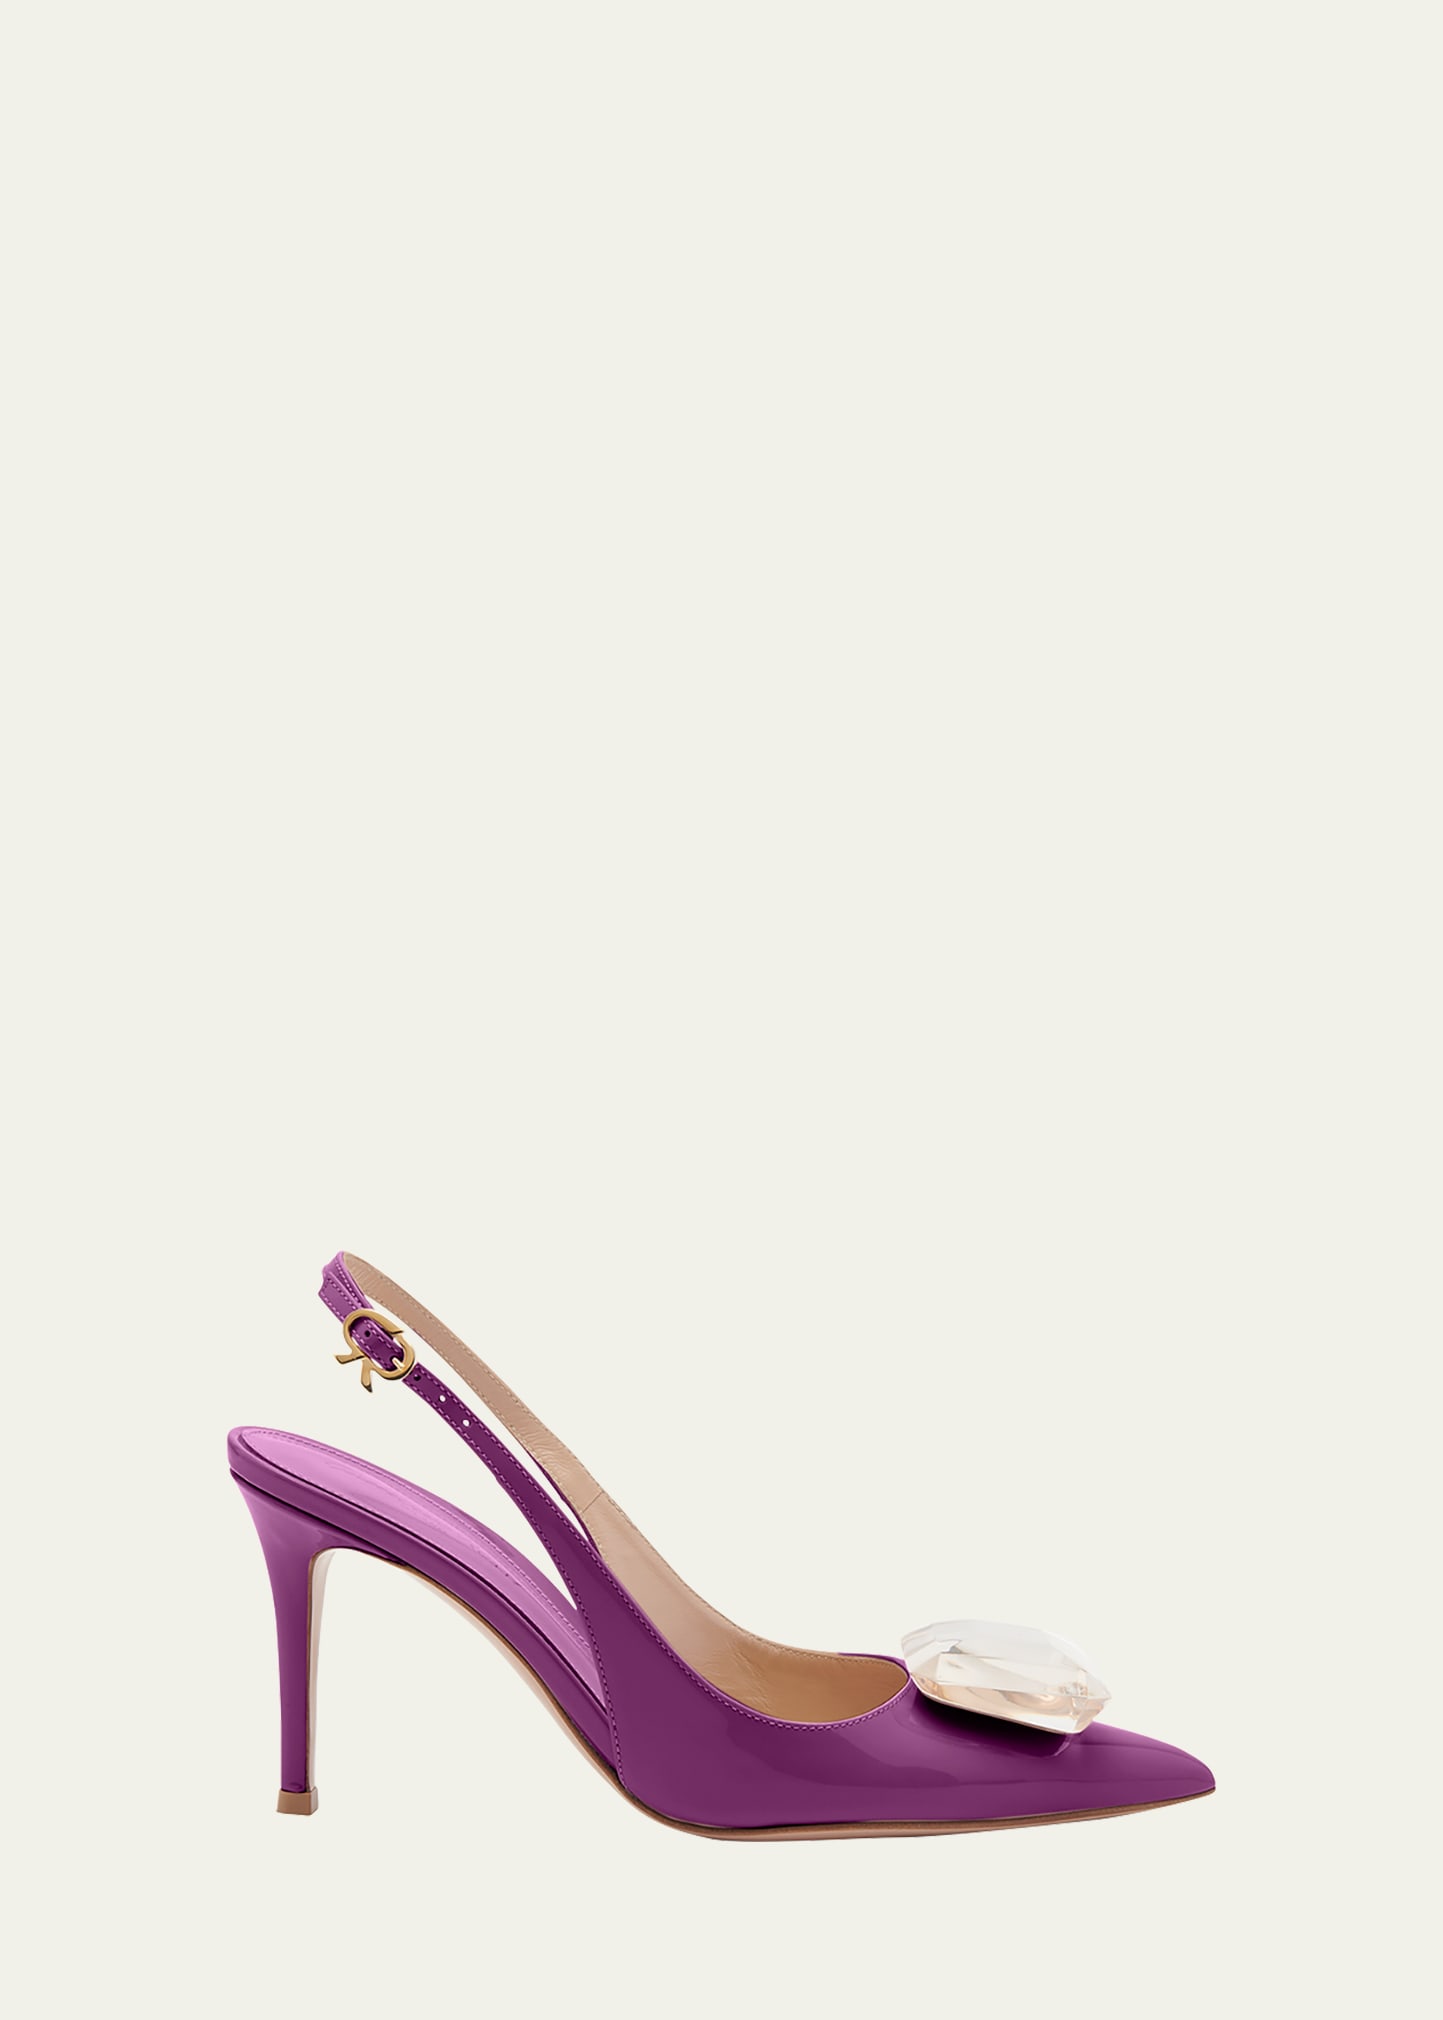 Gianvito Rossi Patent Jewel Slingback Pumps In Violet